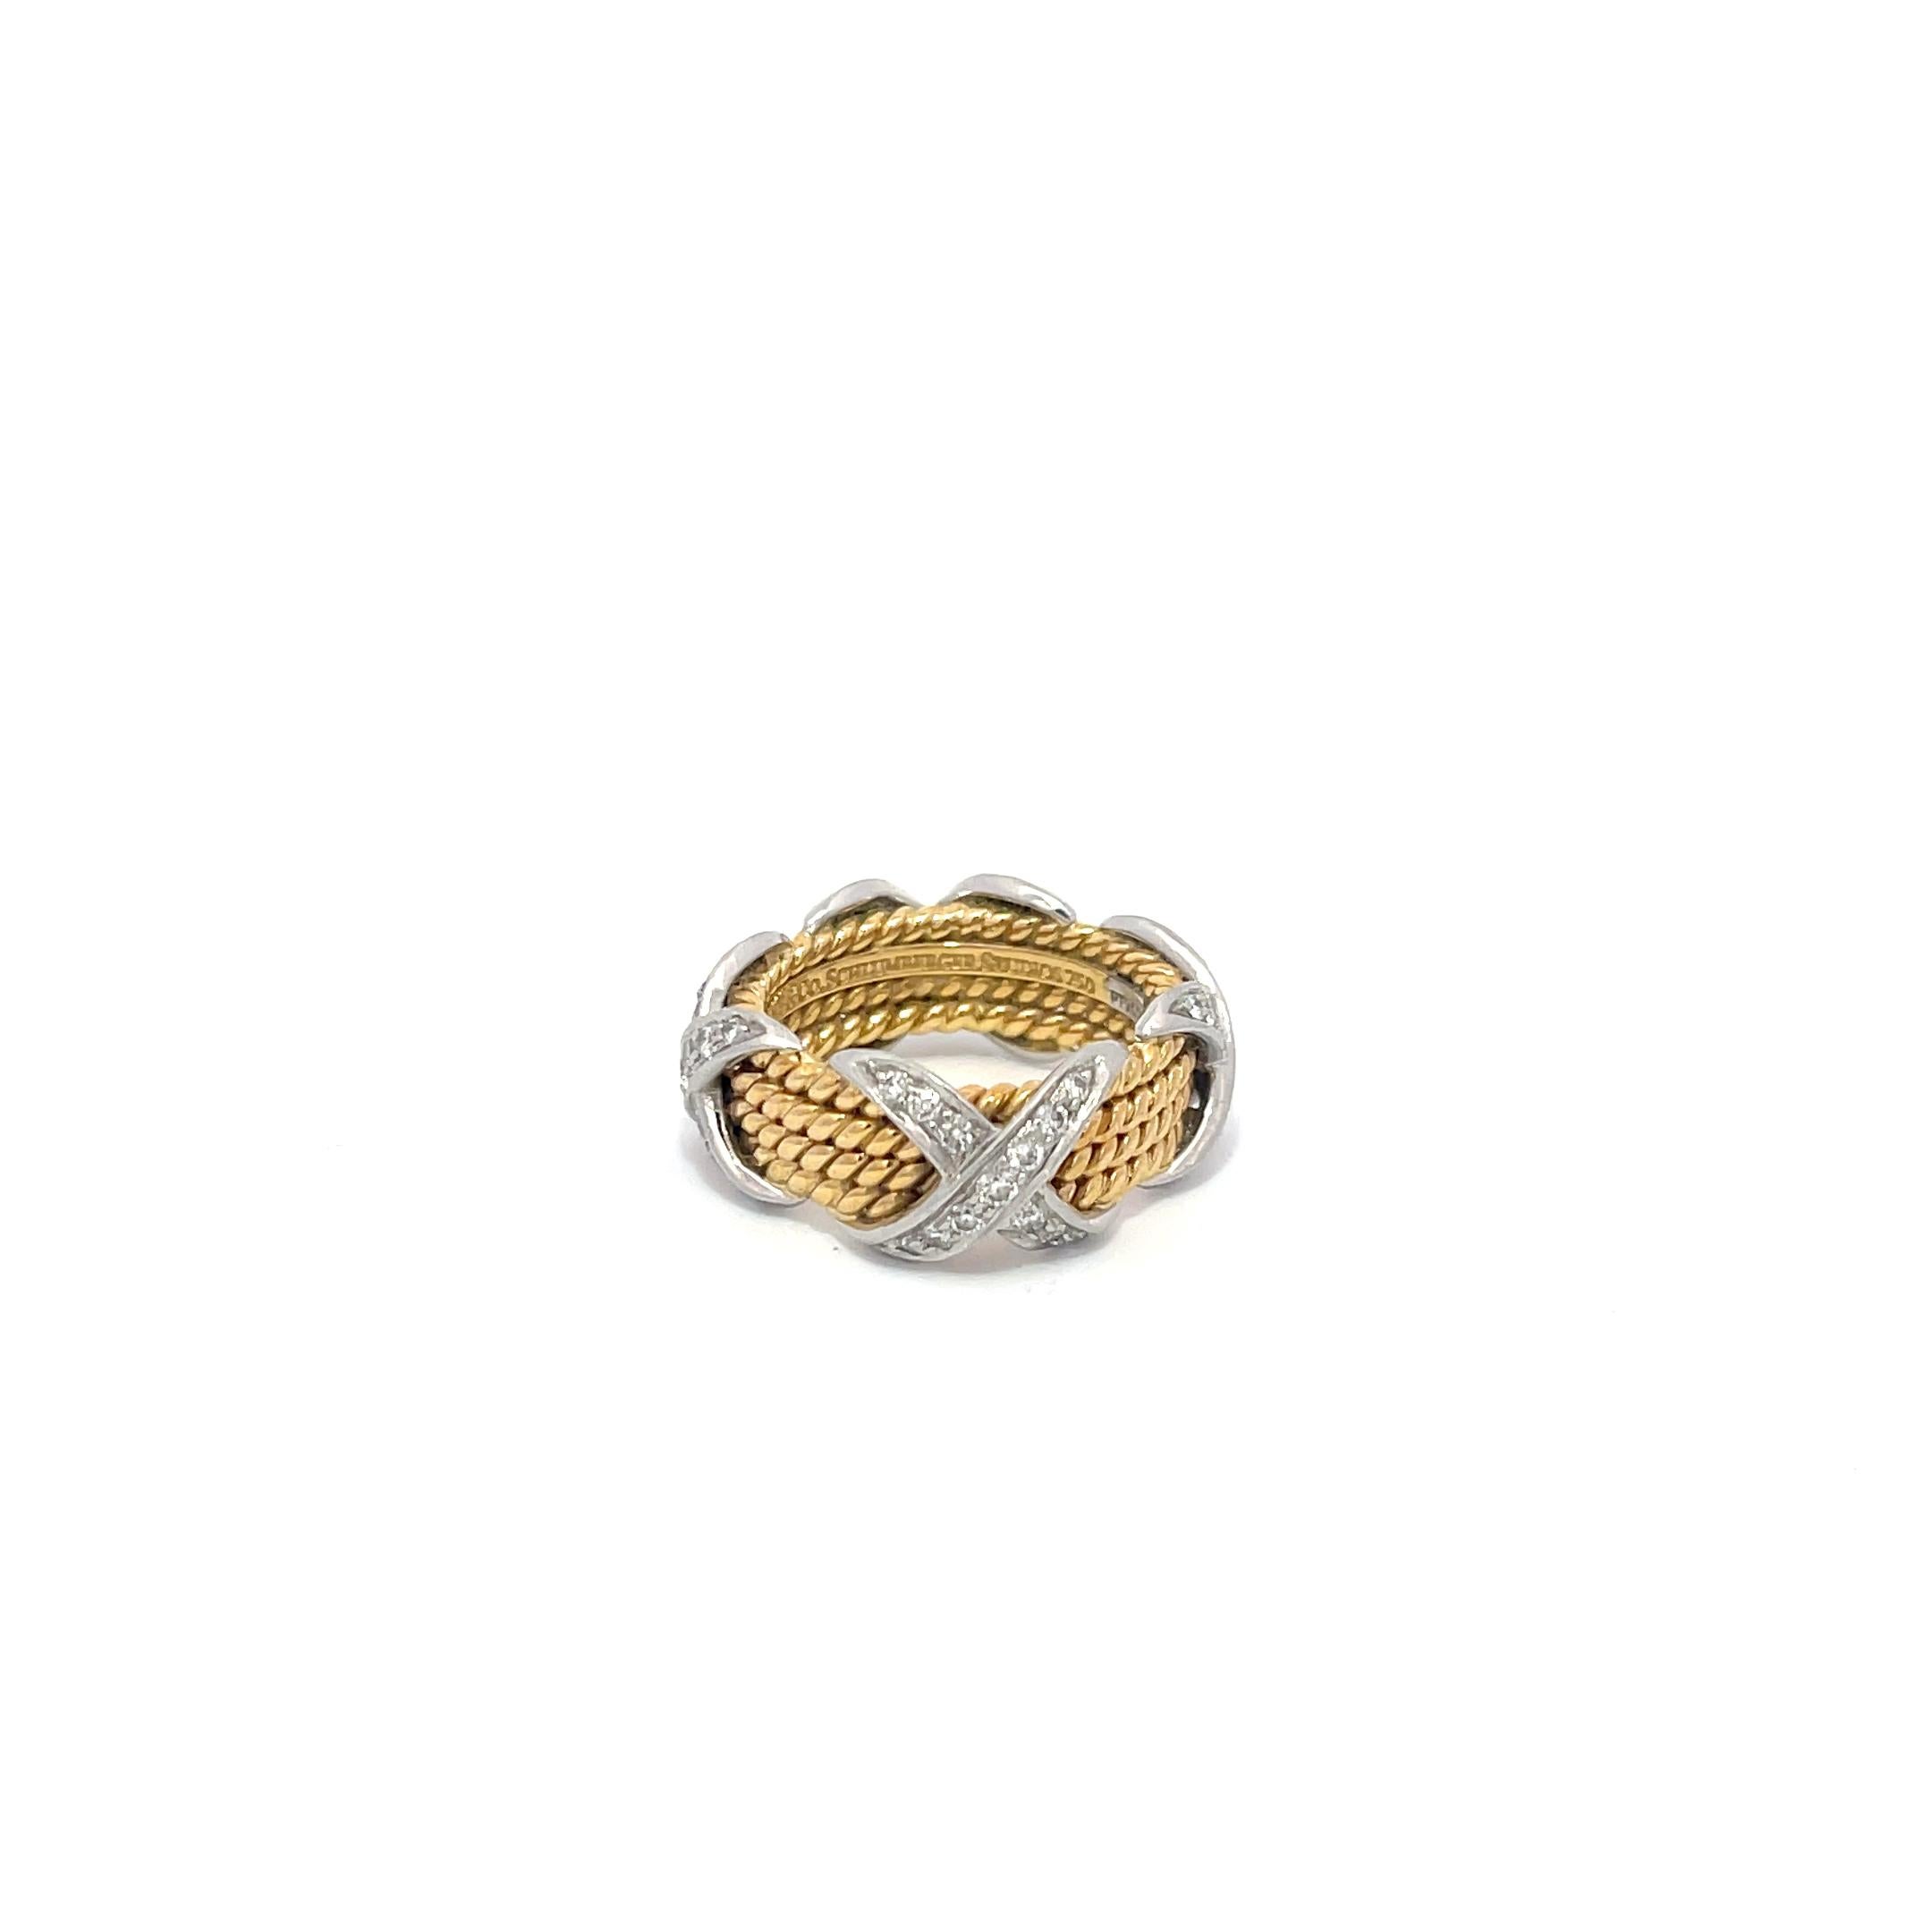 Tiffany & Co. Schlumberger Four Row X Diamond Ring Platinum 18K Yellow Gold In Excellent Condition For Sale In Dallas, TX